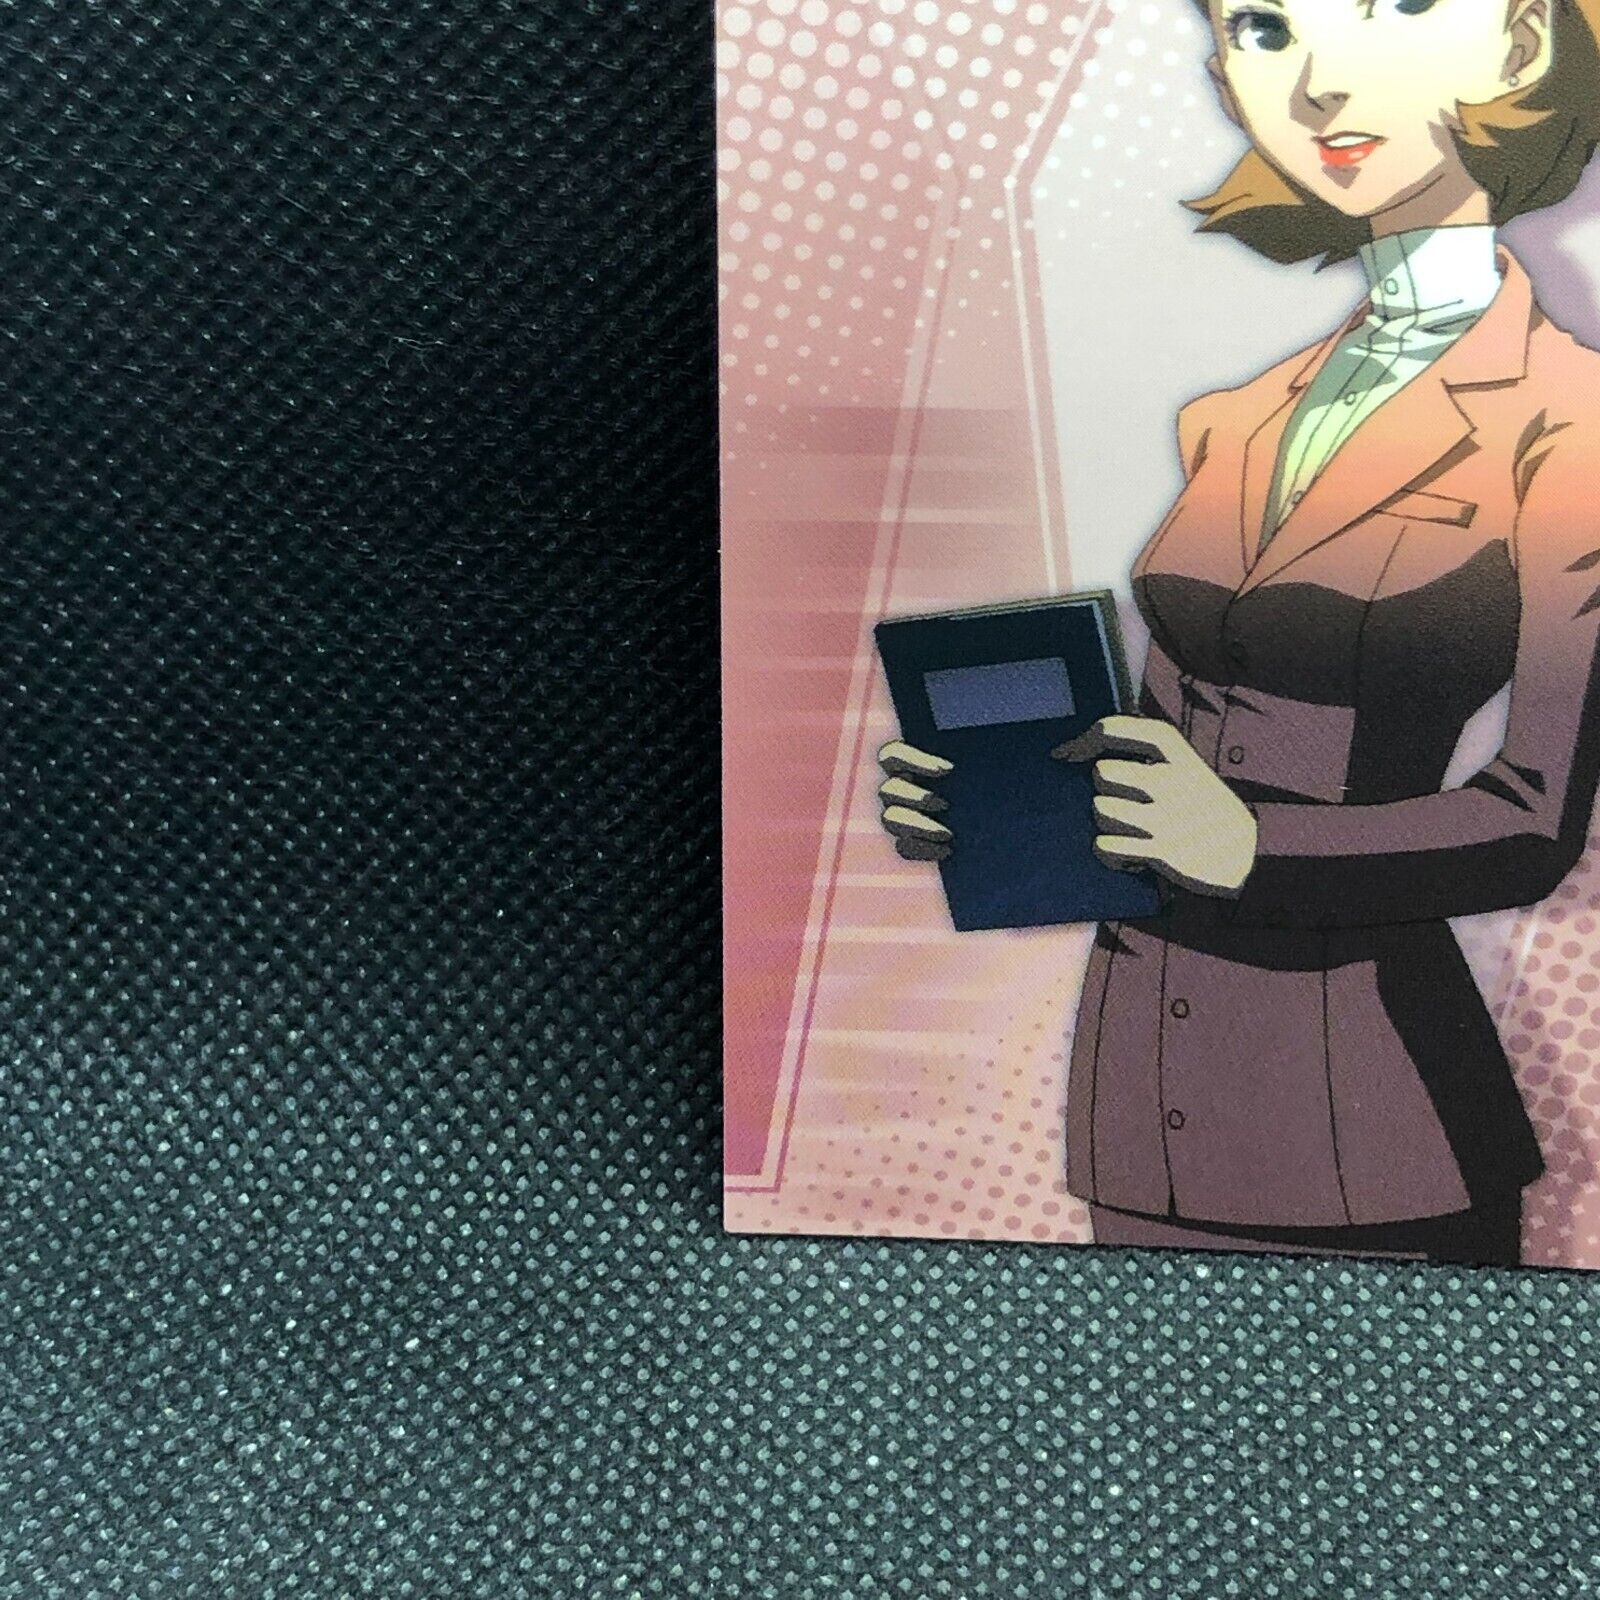 Toriumi Isako Persona 3 No.17 Card 1ST ED Atlus Frontier Works Japan F/S50